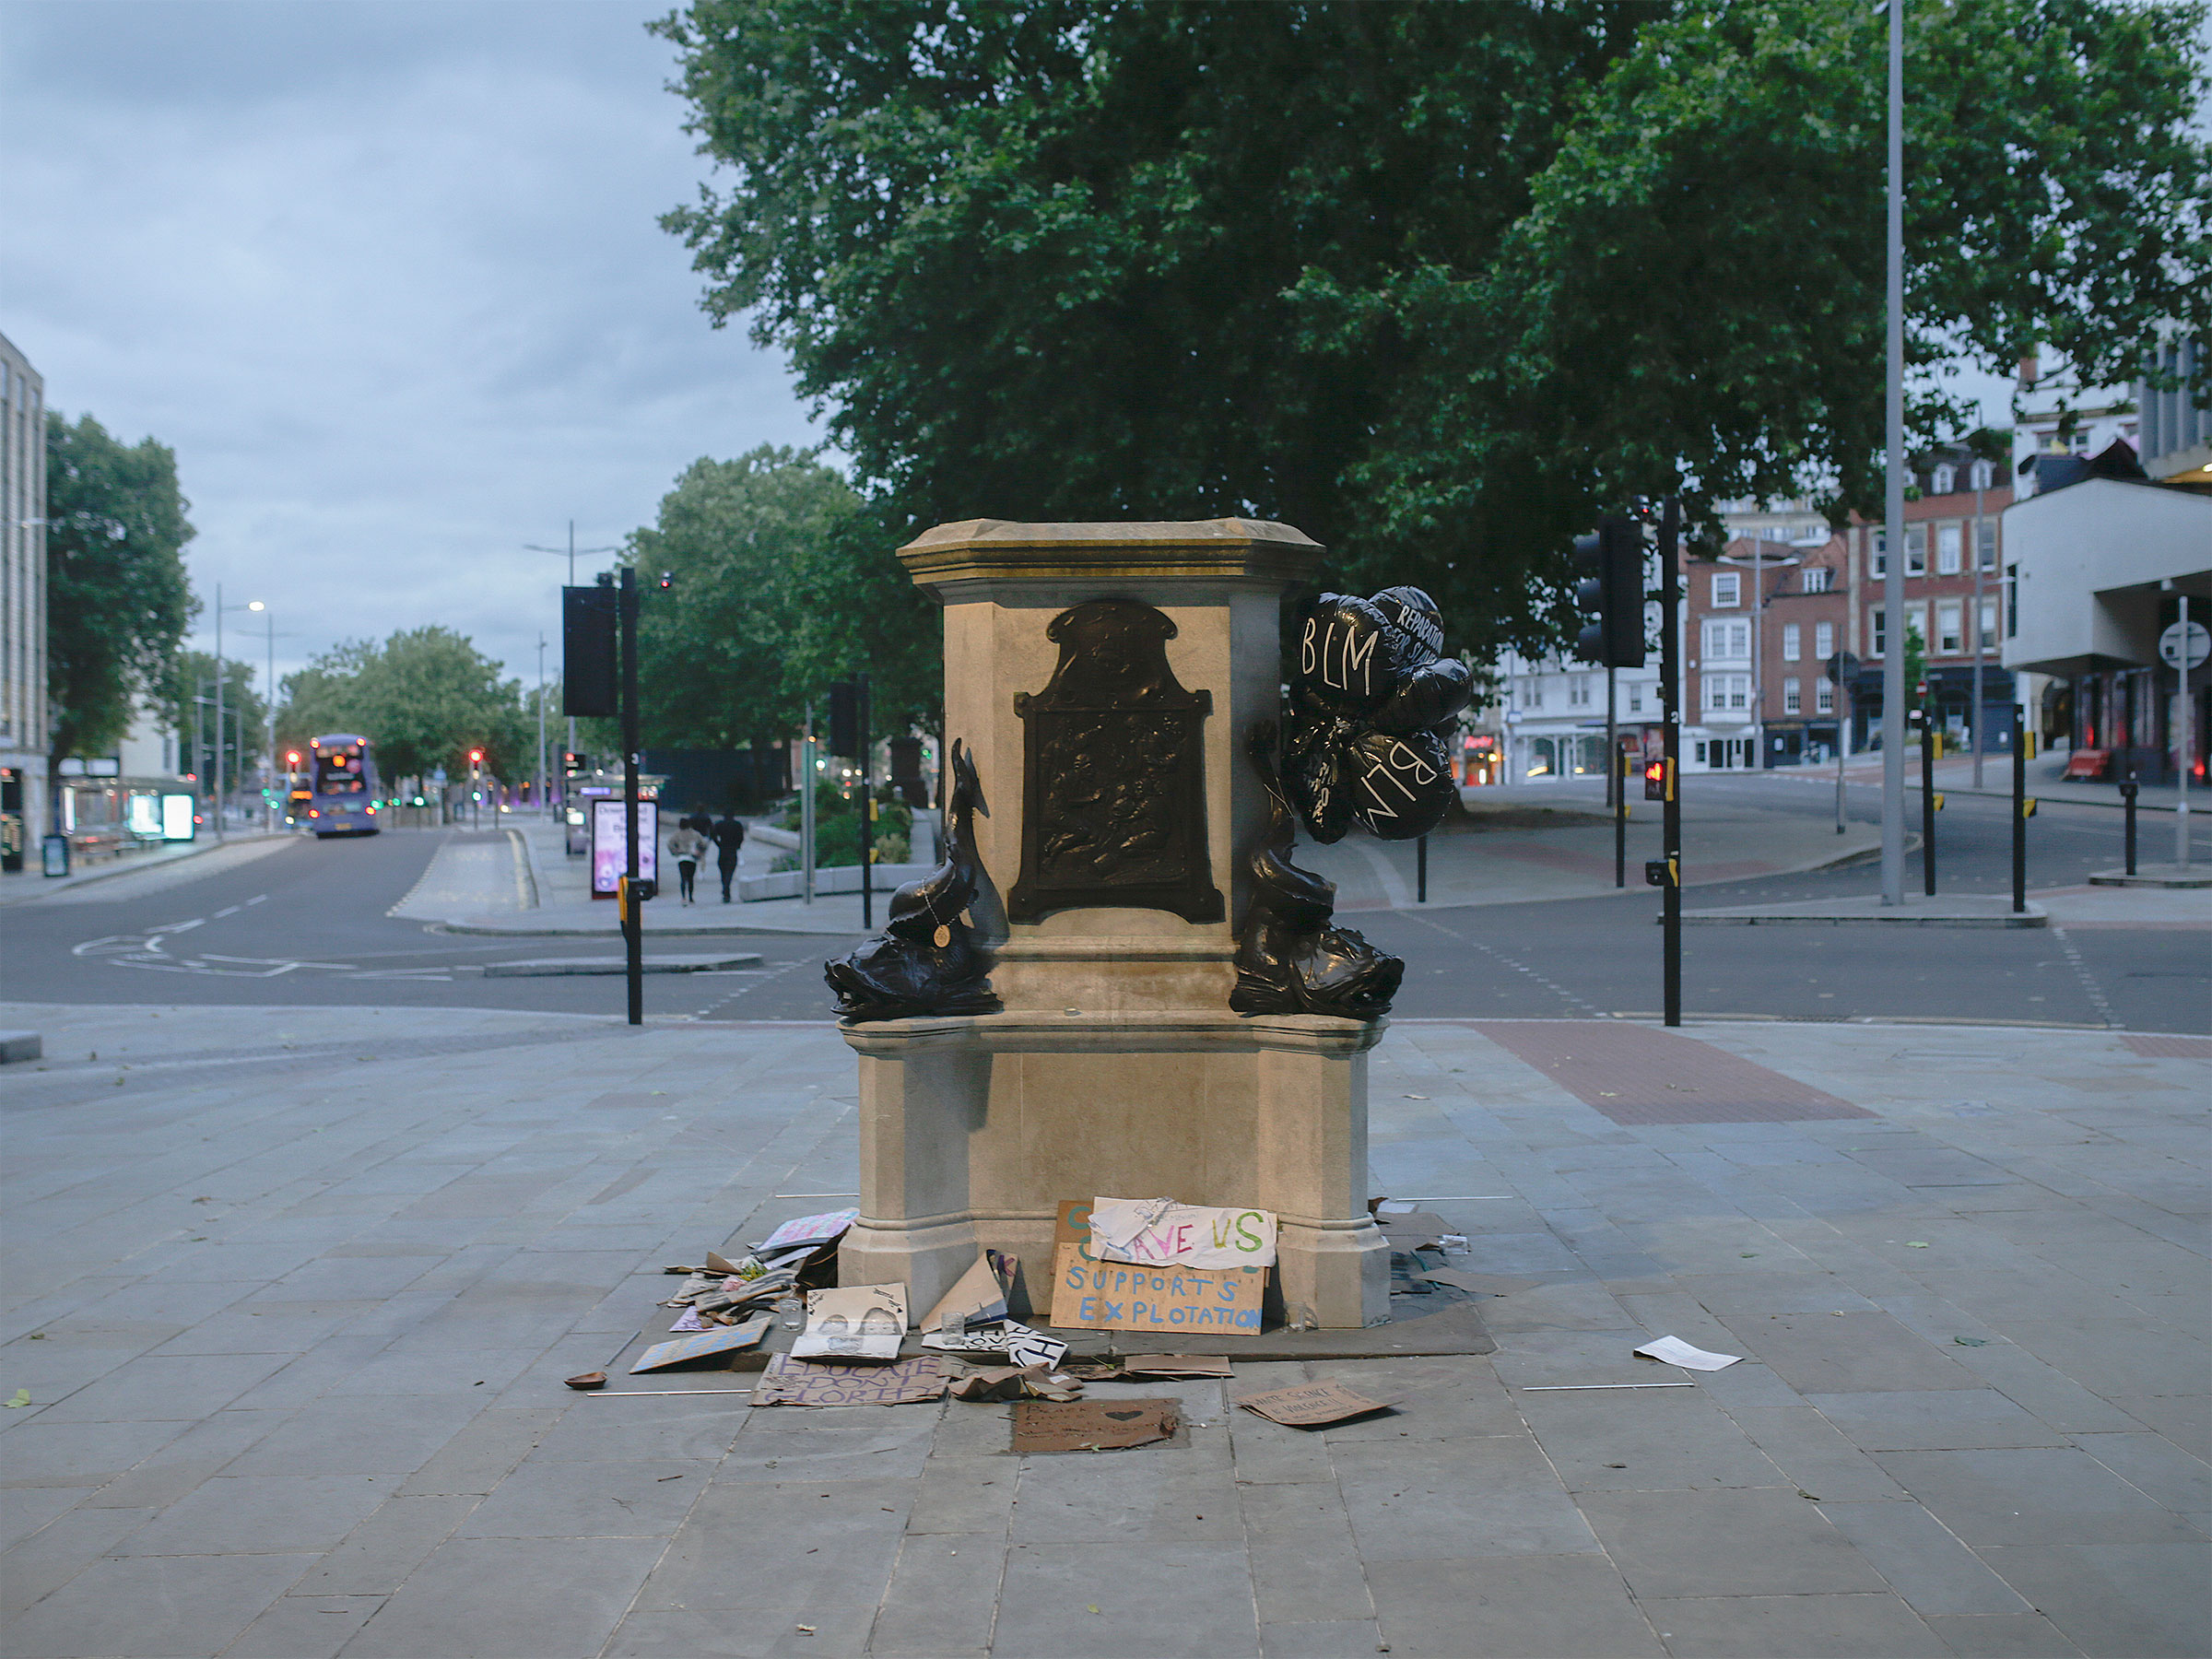 The plinth of the statue of Edward Colston in Bristol, England, is now surrounded by messages of support for the Black Lives Matter movement, June 11, 2020. (James Beck—The New York Times/Redux)